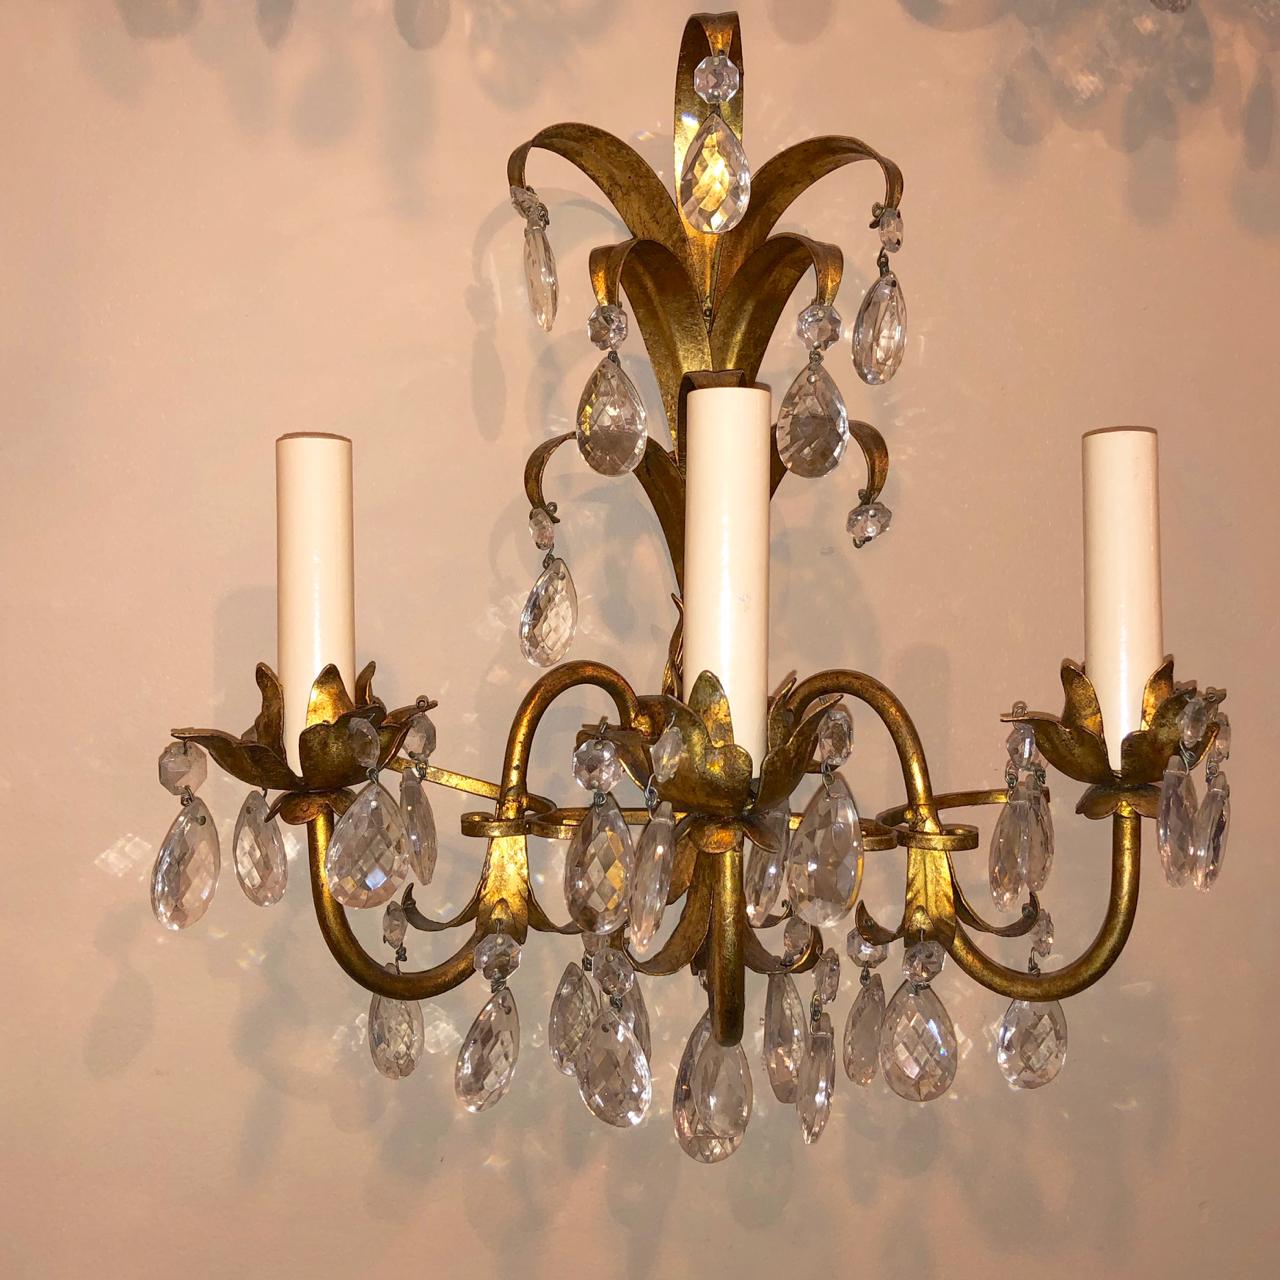 Italian Gilt Metal Sconces with Crystals For Sale